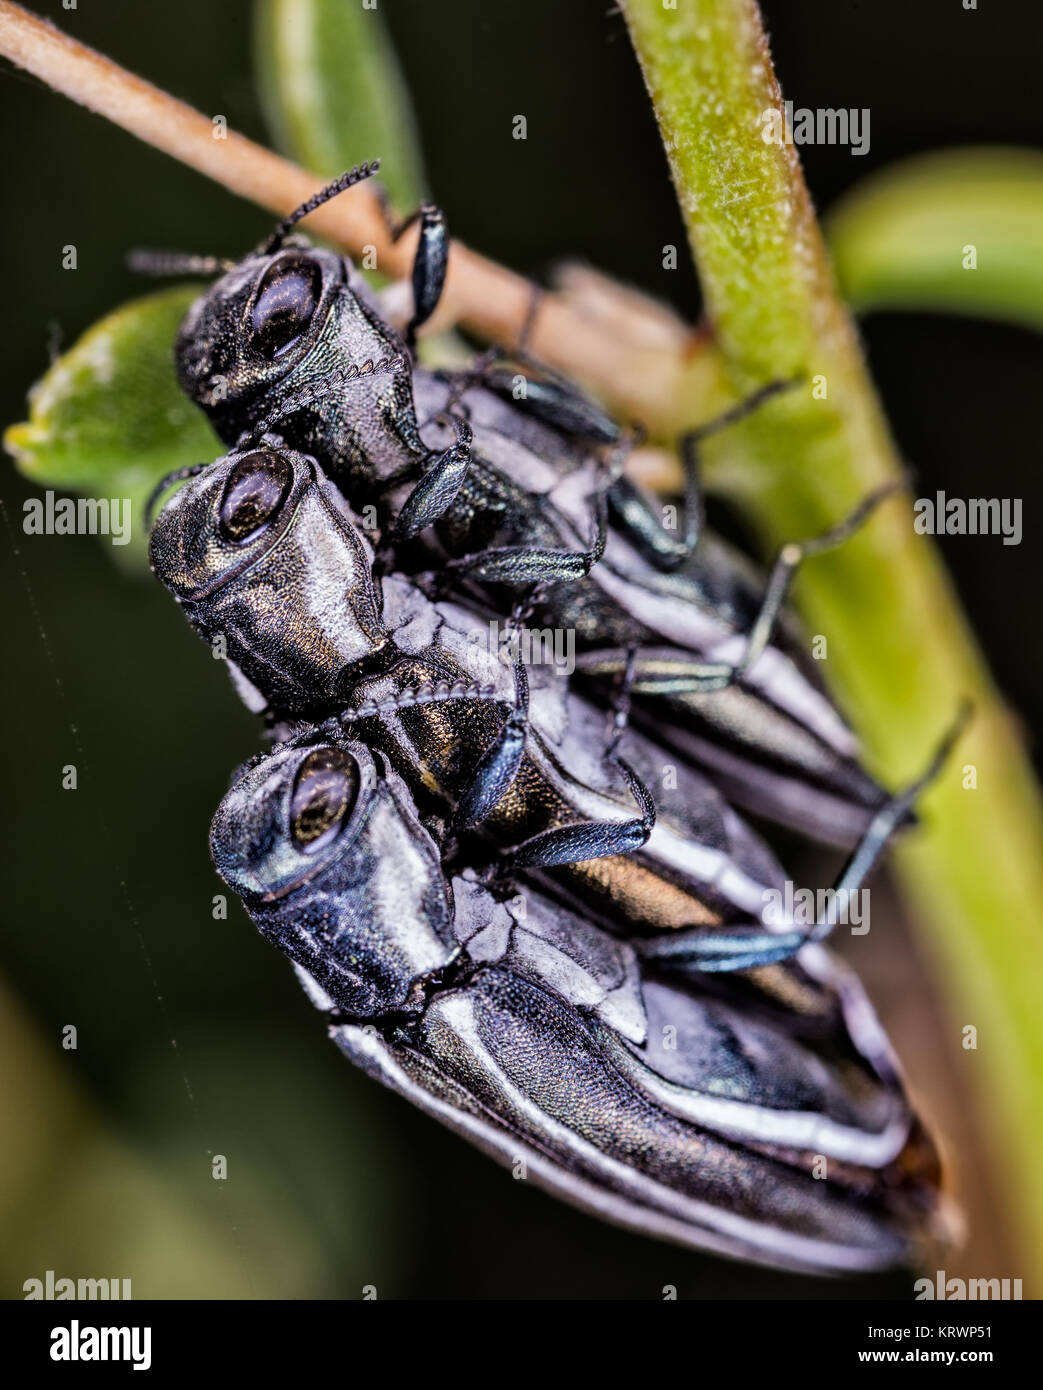 Three insects (Agrilus bilineatus) photographed in their natural environment. Stock Photo